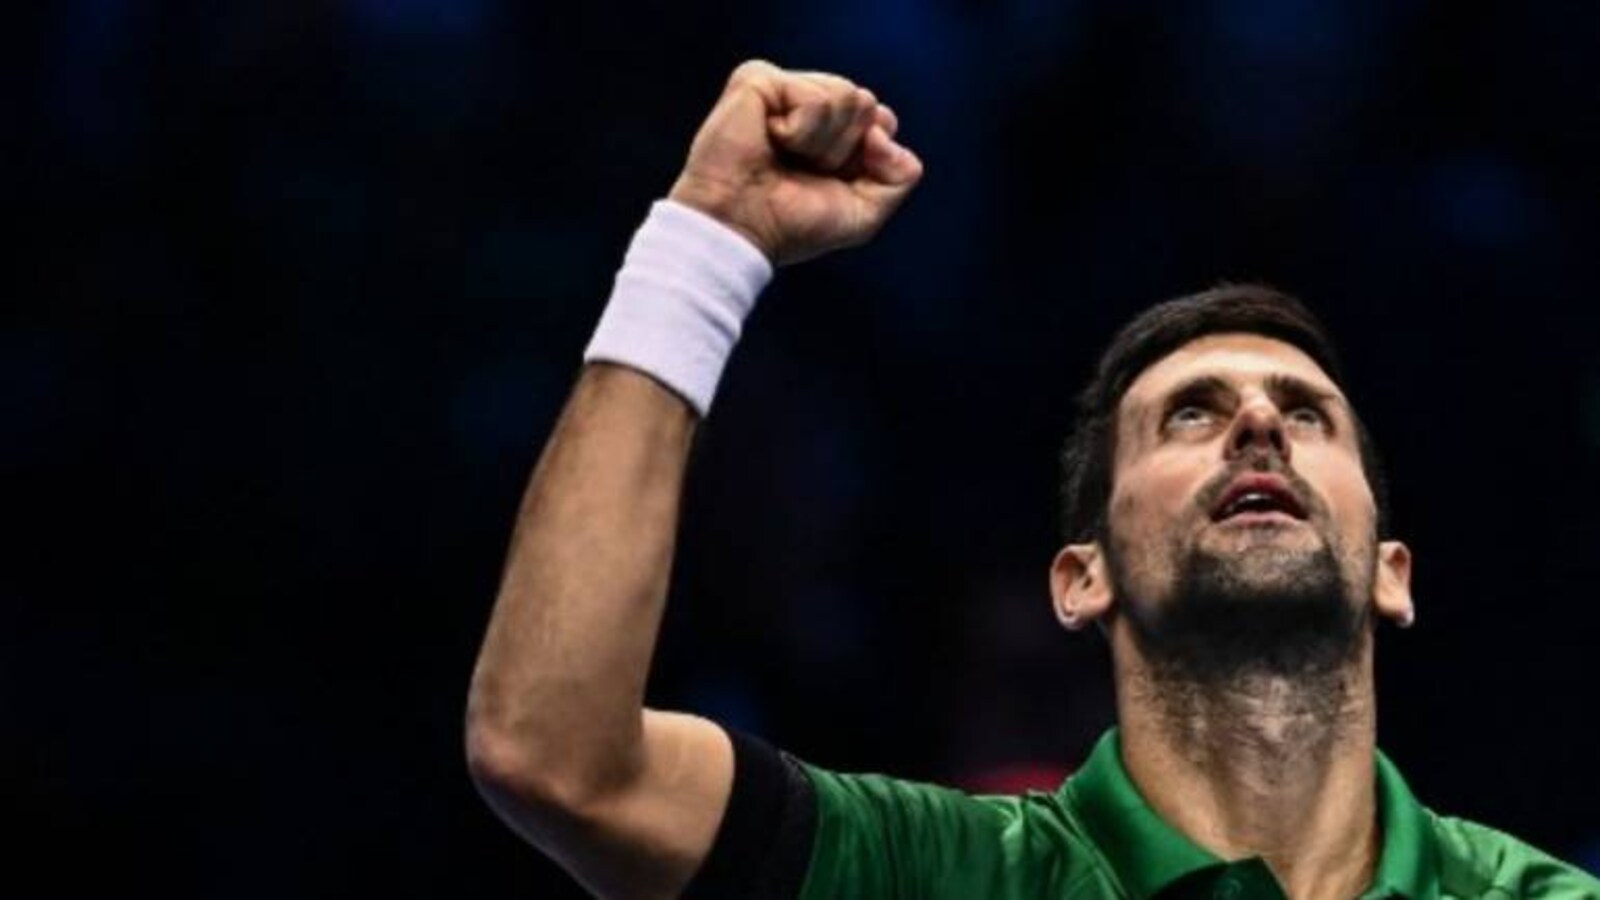 Novak Djokovic says he is excited to take part in Dubai's World Tennis  League